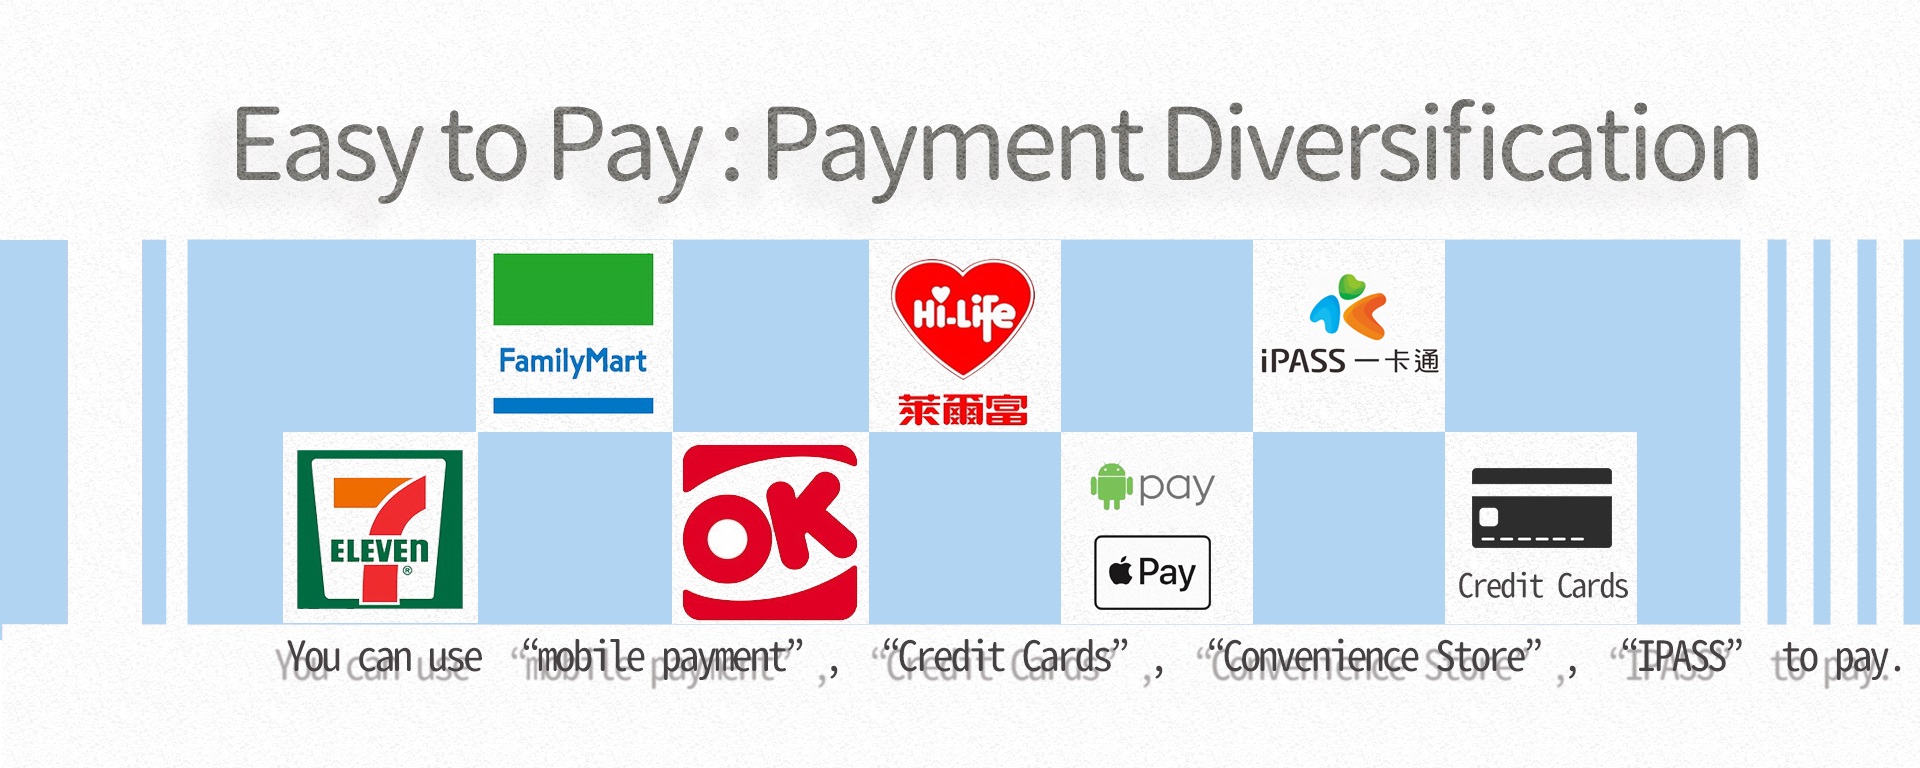 Easy to Pay Payment Diversification